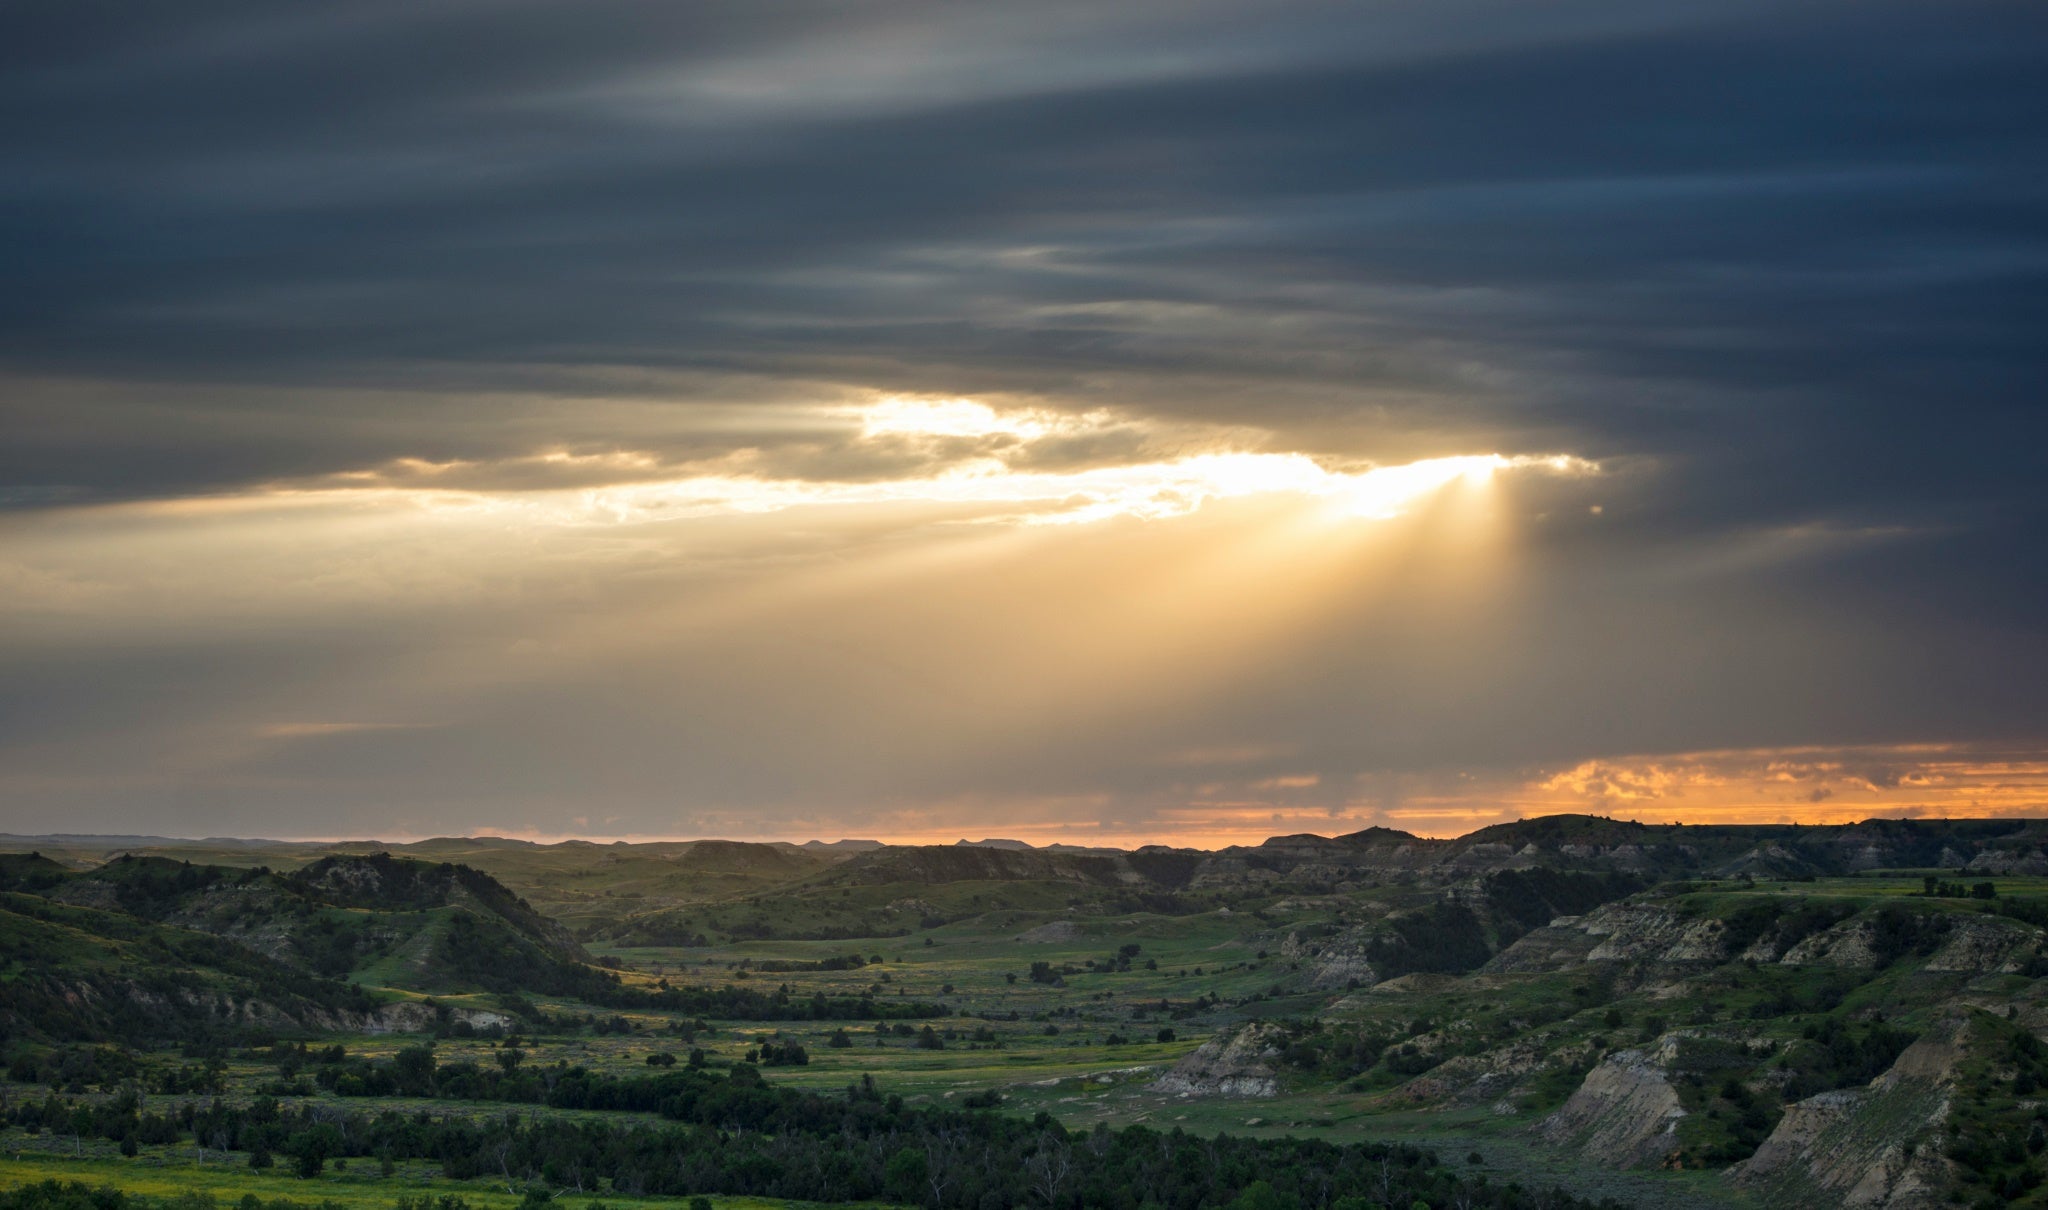 37.02 Theodore Roosevelt National Park.jpg__PID:0268dfa4-9a54-4ee1-9c34-789d20baccc4